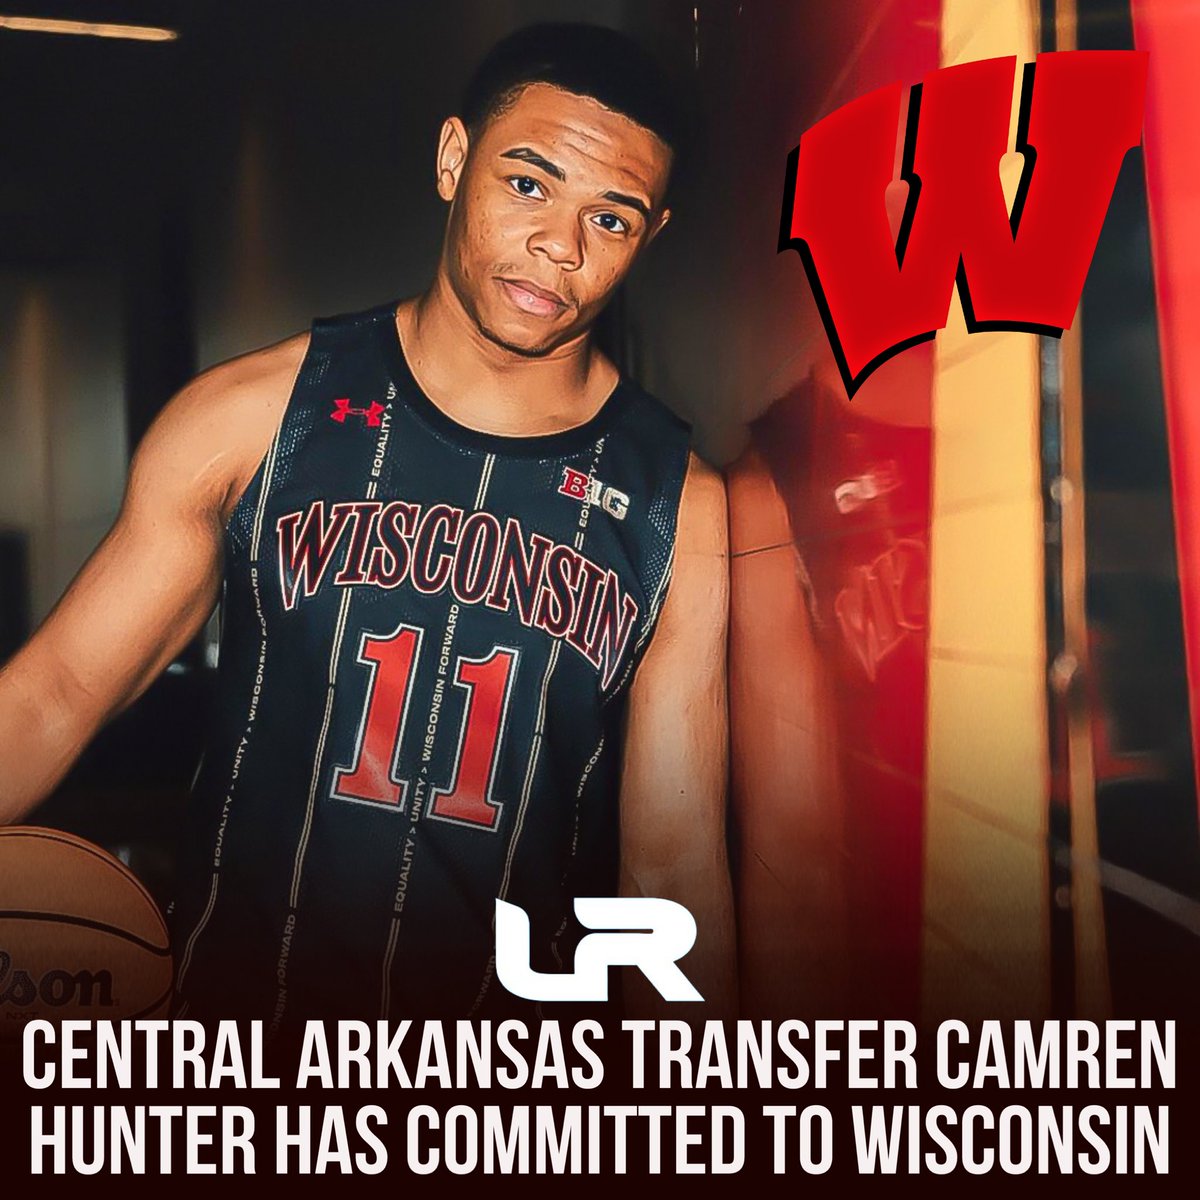 NEWS: Central Arkansas transfer Camren Hunter has committed to Wisconsin, a source tells @LeagueRDY. Hunter is a native of Bryant, Arkansas who played the first two seasons of his career for the Bears. Did not play in 23-24 due to injury. He averaged 16.9PPG, 5.0RPG and 3.9APG…